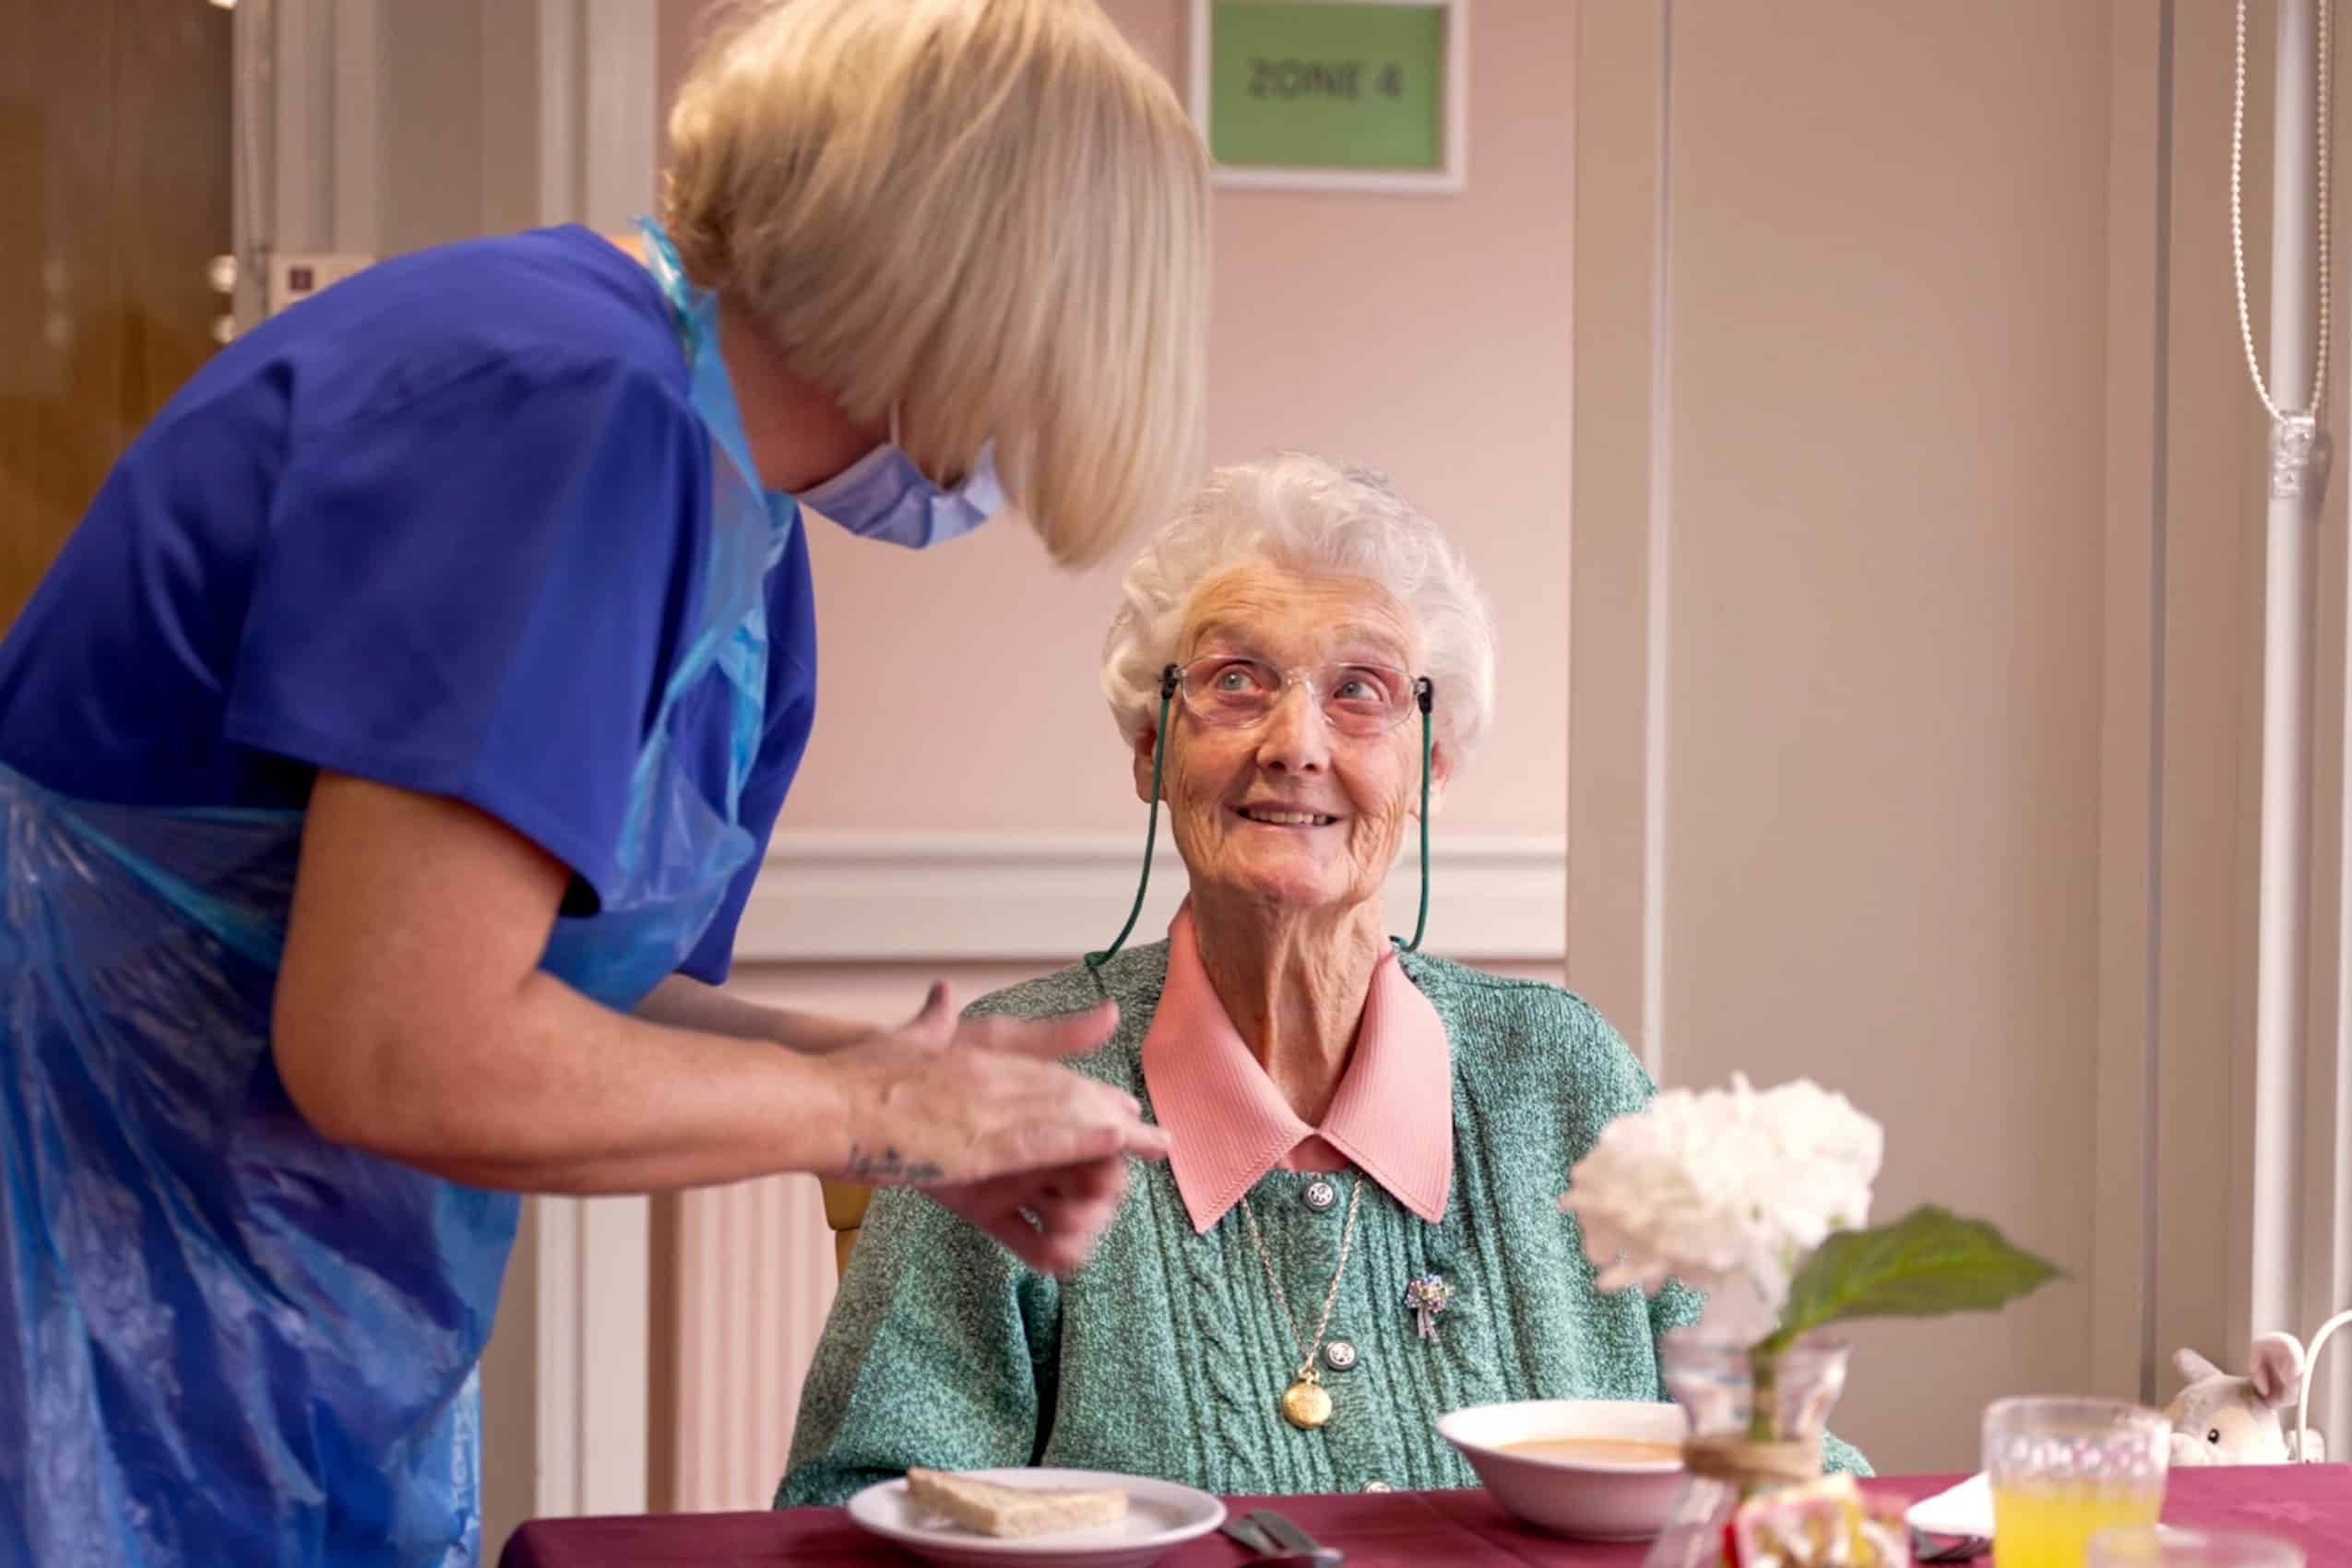 Resident and team member during a mealtime at Cranford Care Home in Aberdeen.